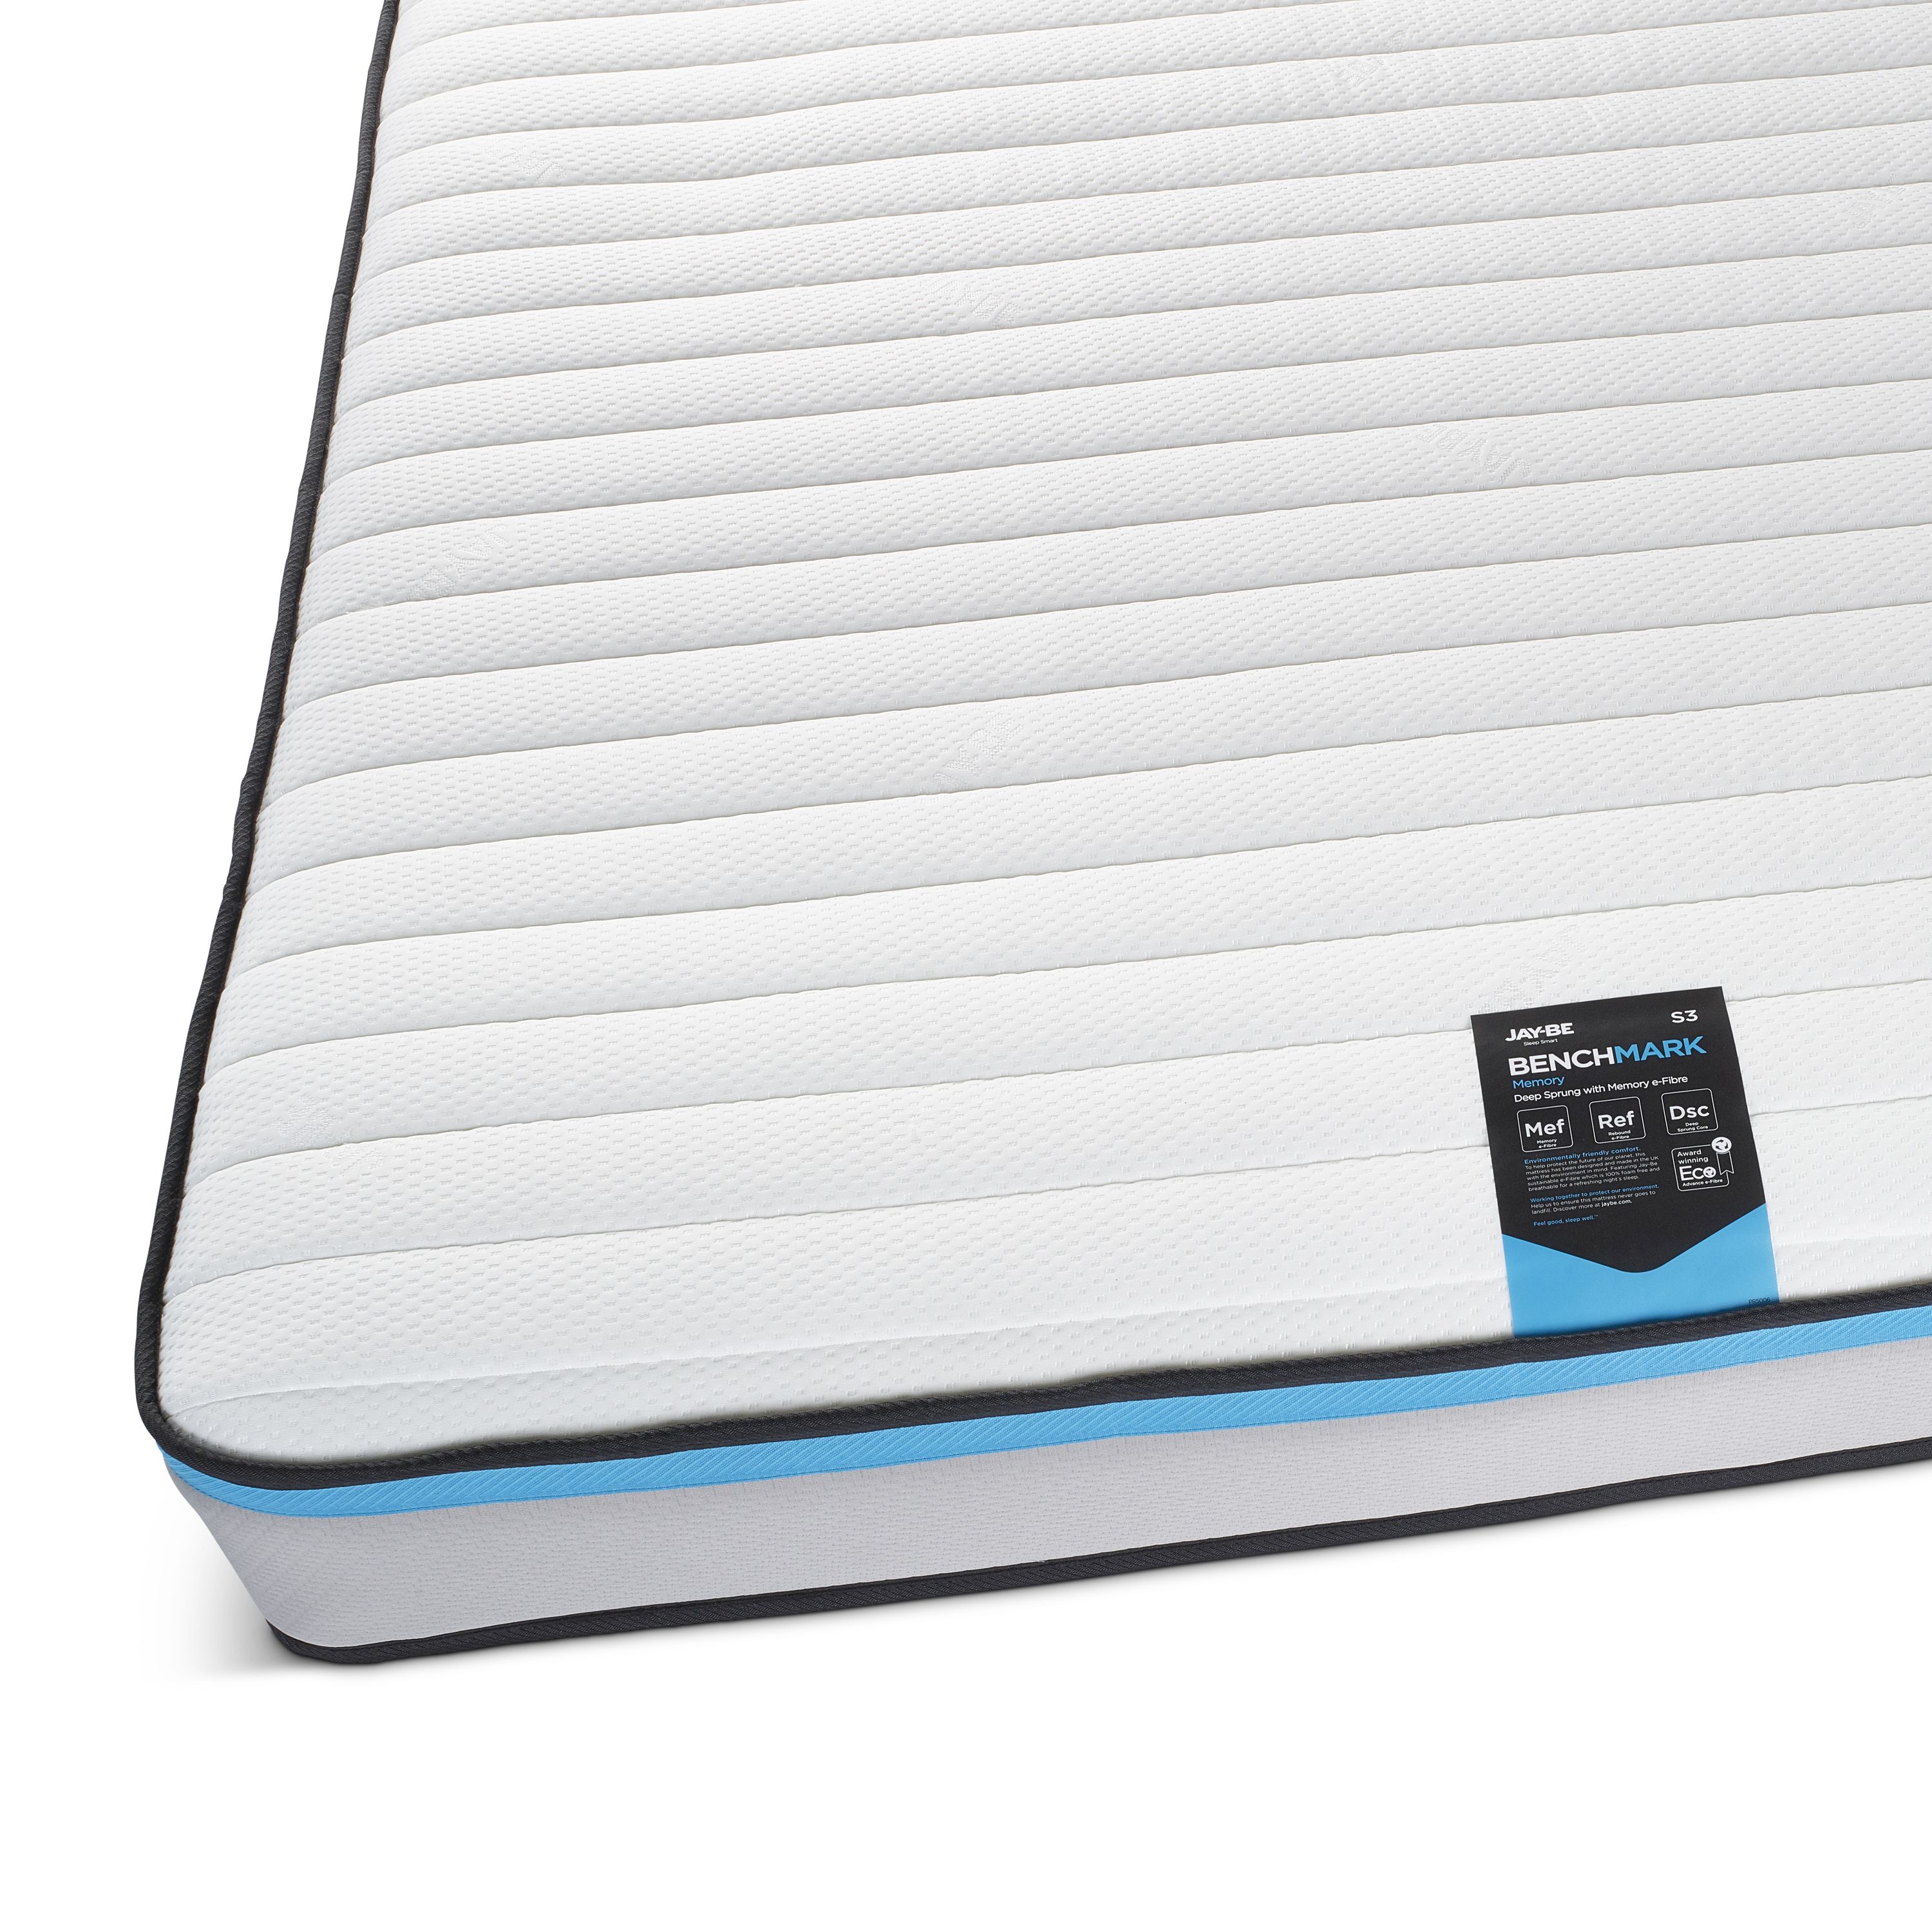 Jay-Be Benchmark S3 Memory Eco Friendly Open coil Water resistant Small double Mattress